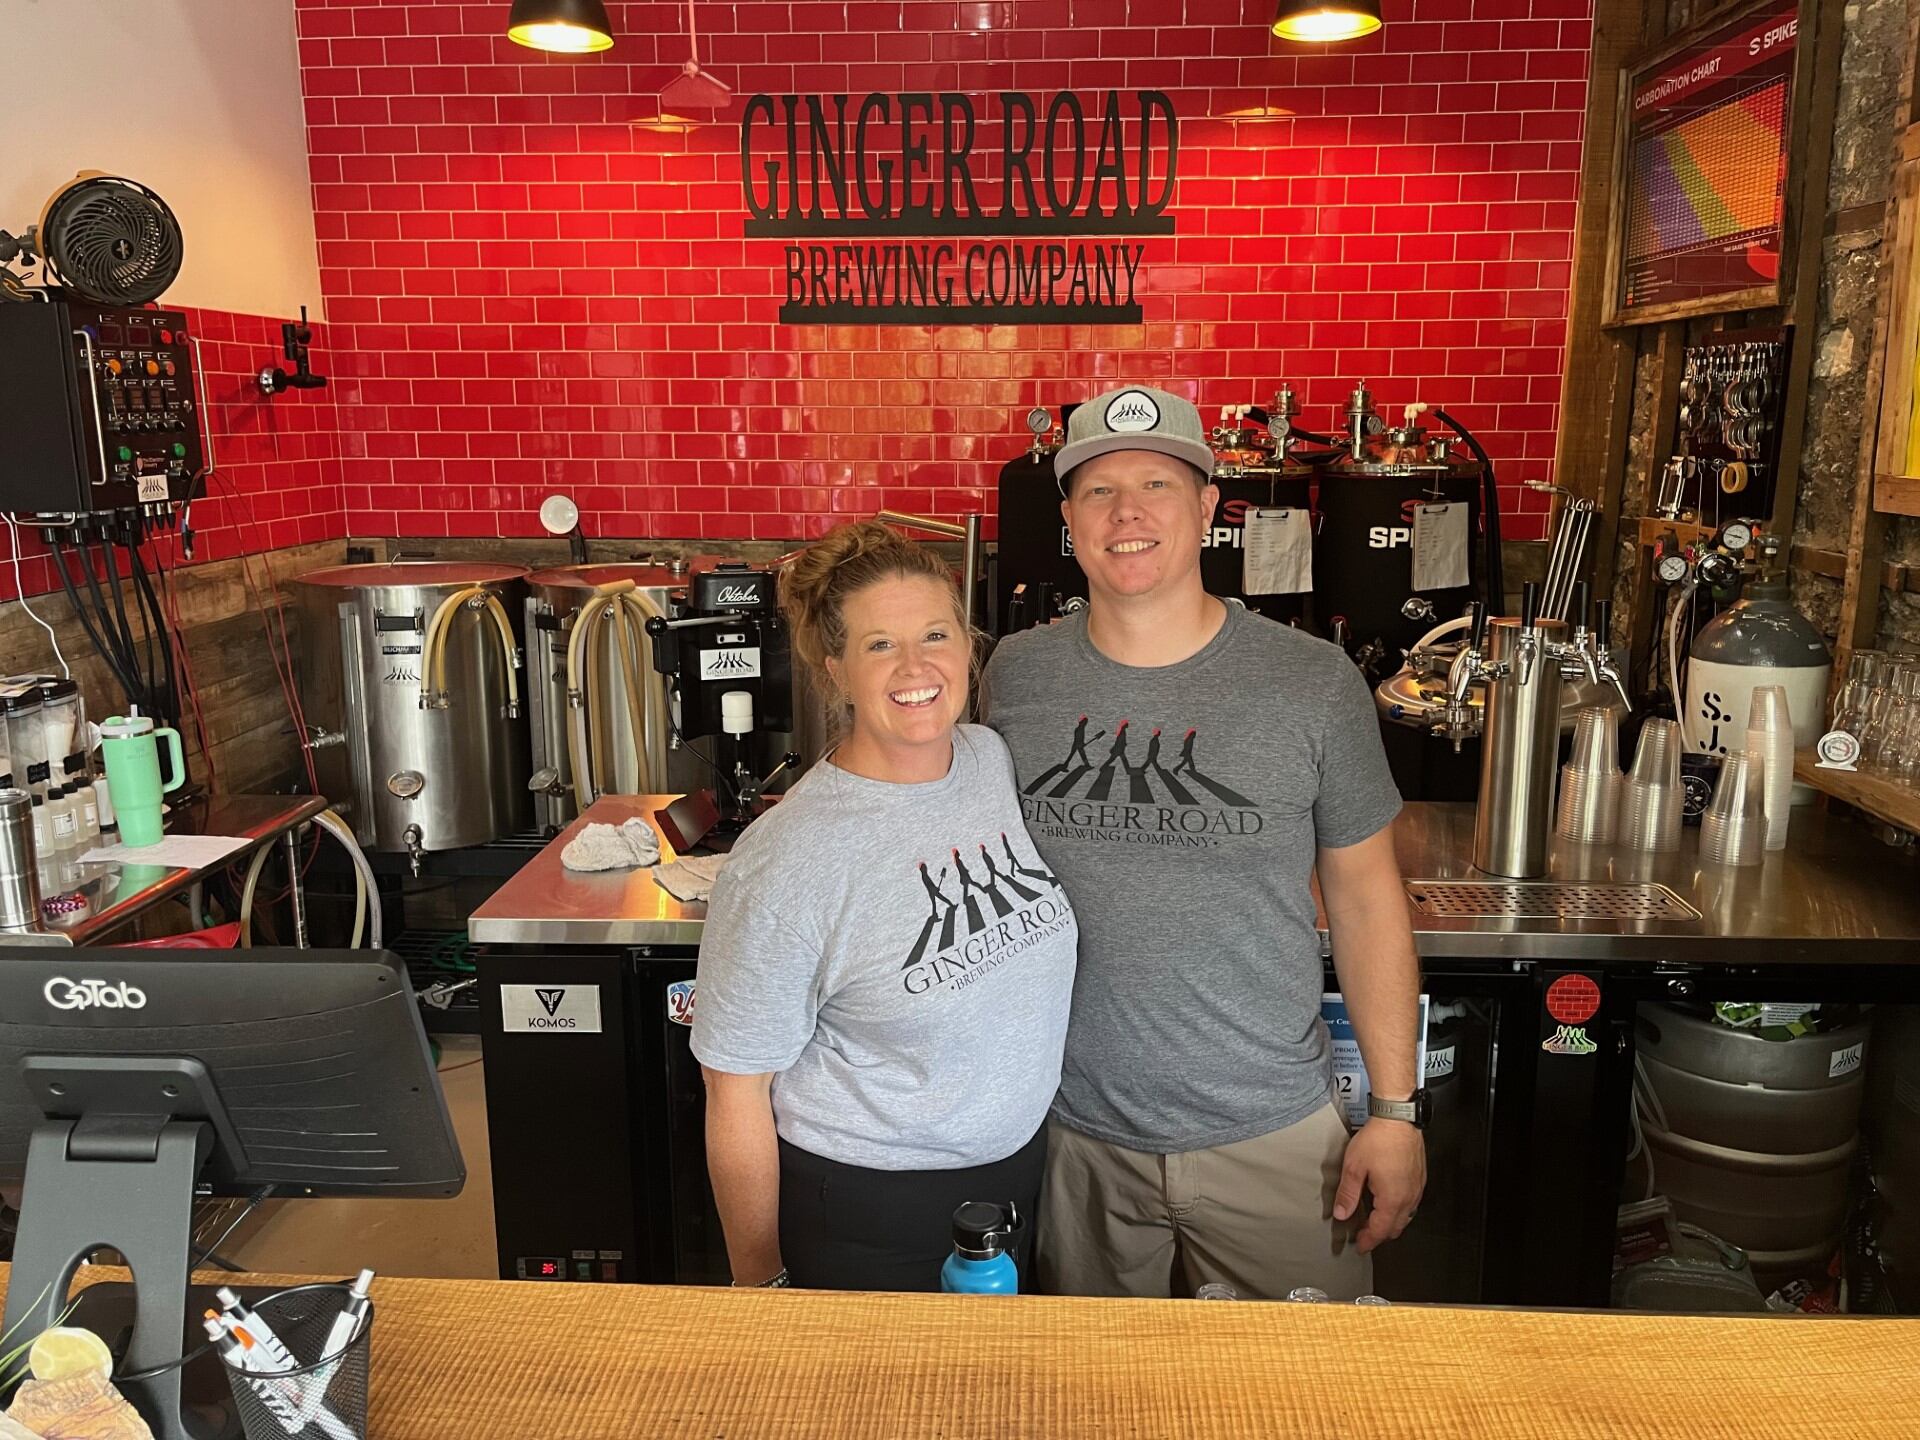 Amy and Dan Stash recently opened Ginger Road Brewing in downtown Utica.